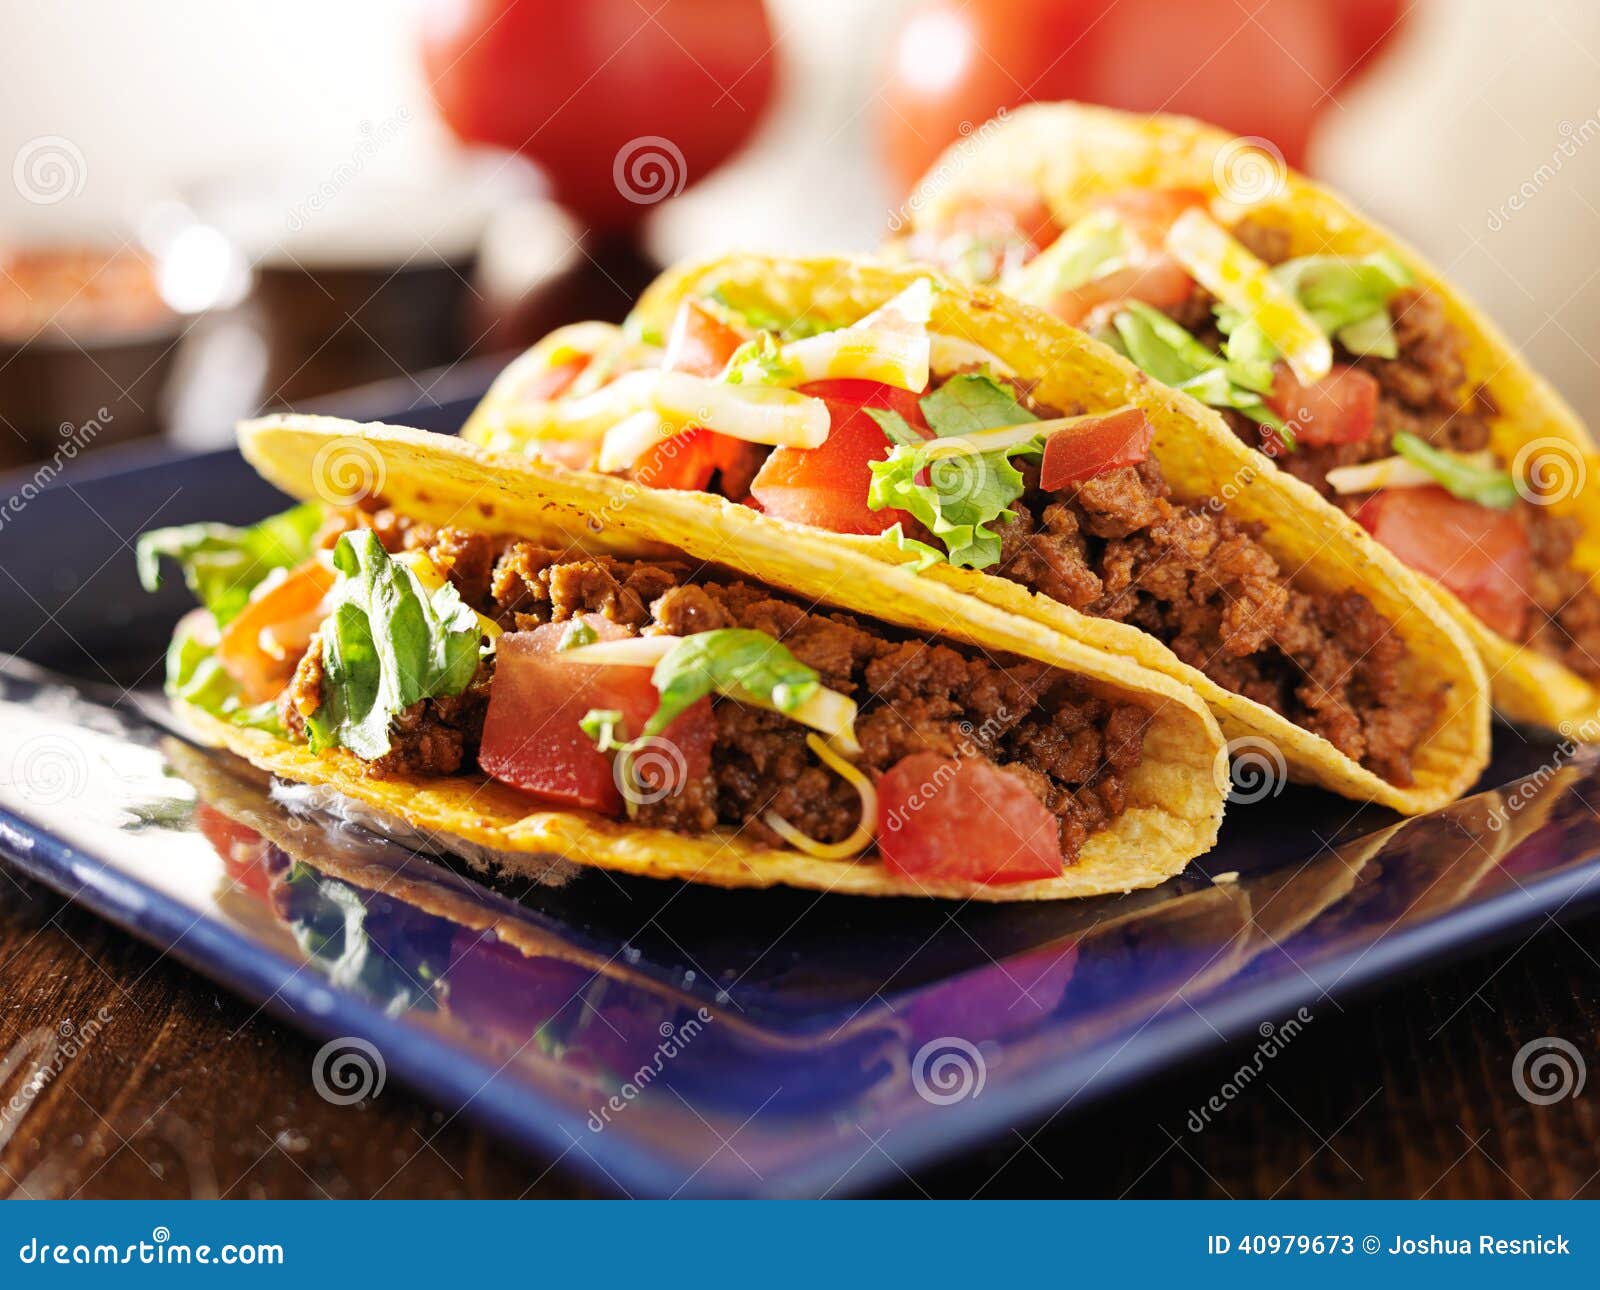 three beef tacos with cheese, lettuce and tomatoes